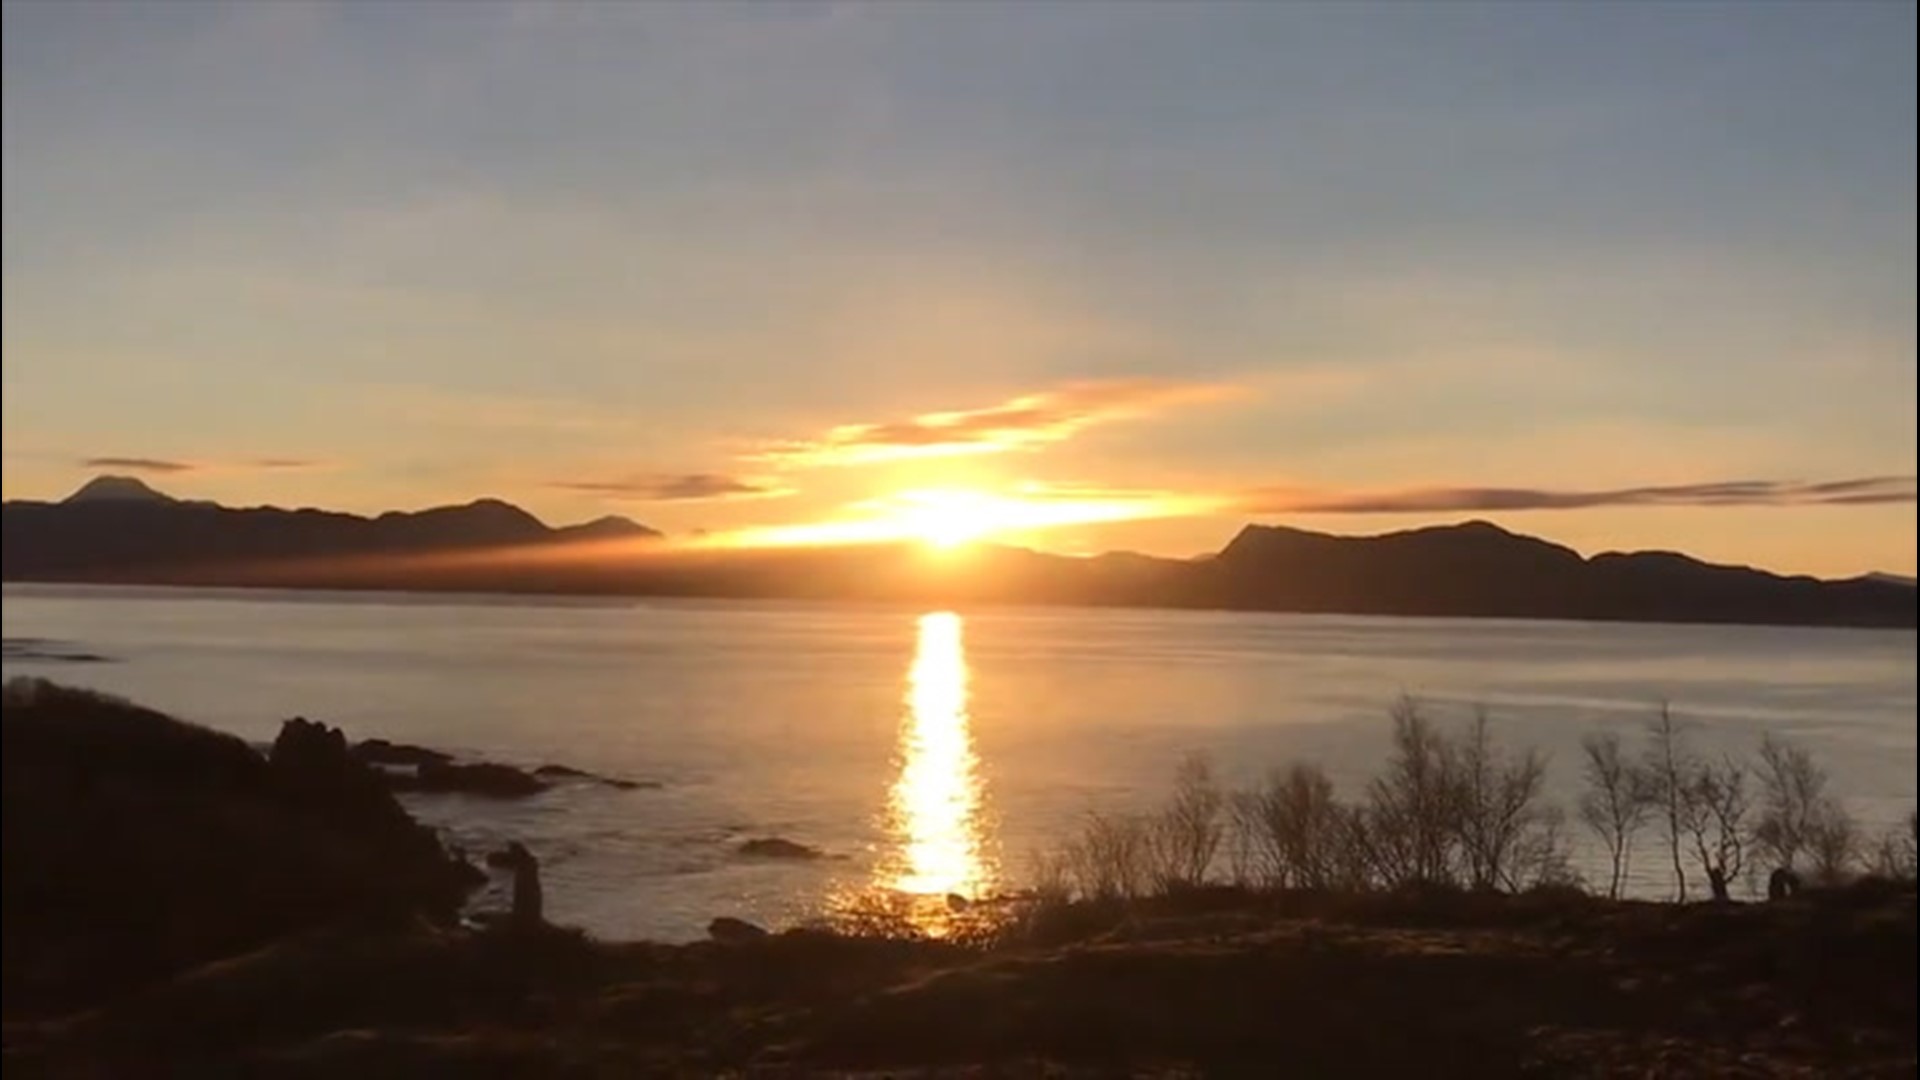 A sunrise over Scotland's Isle of Skye made for a majestic start to March.